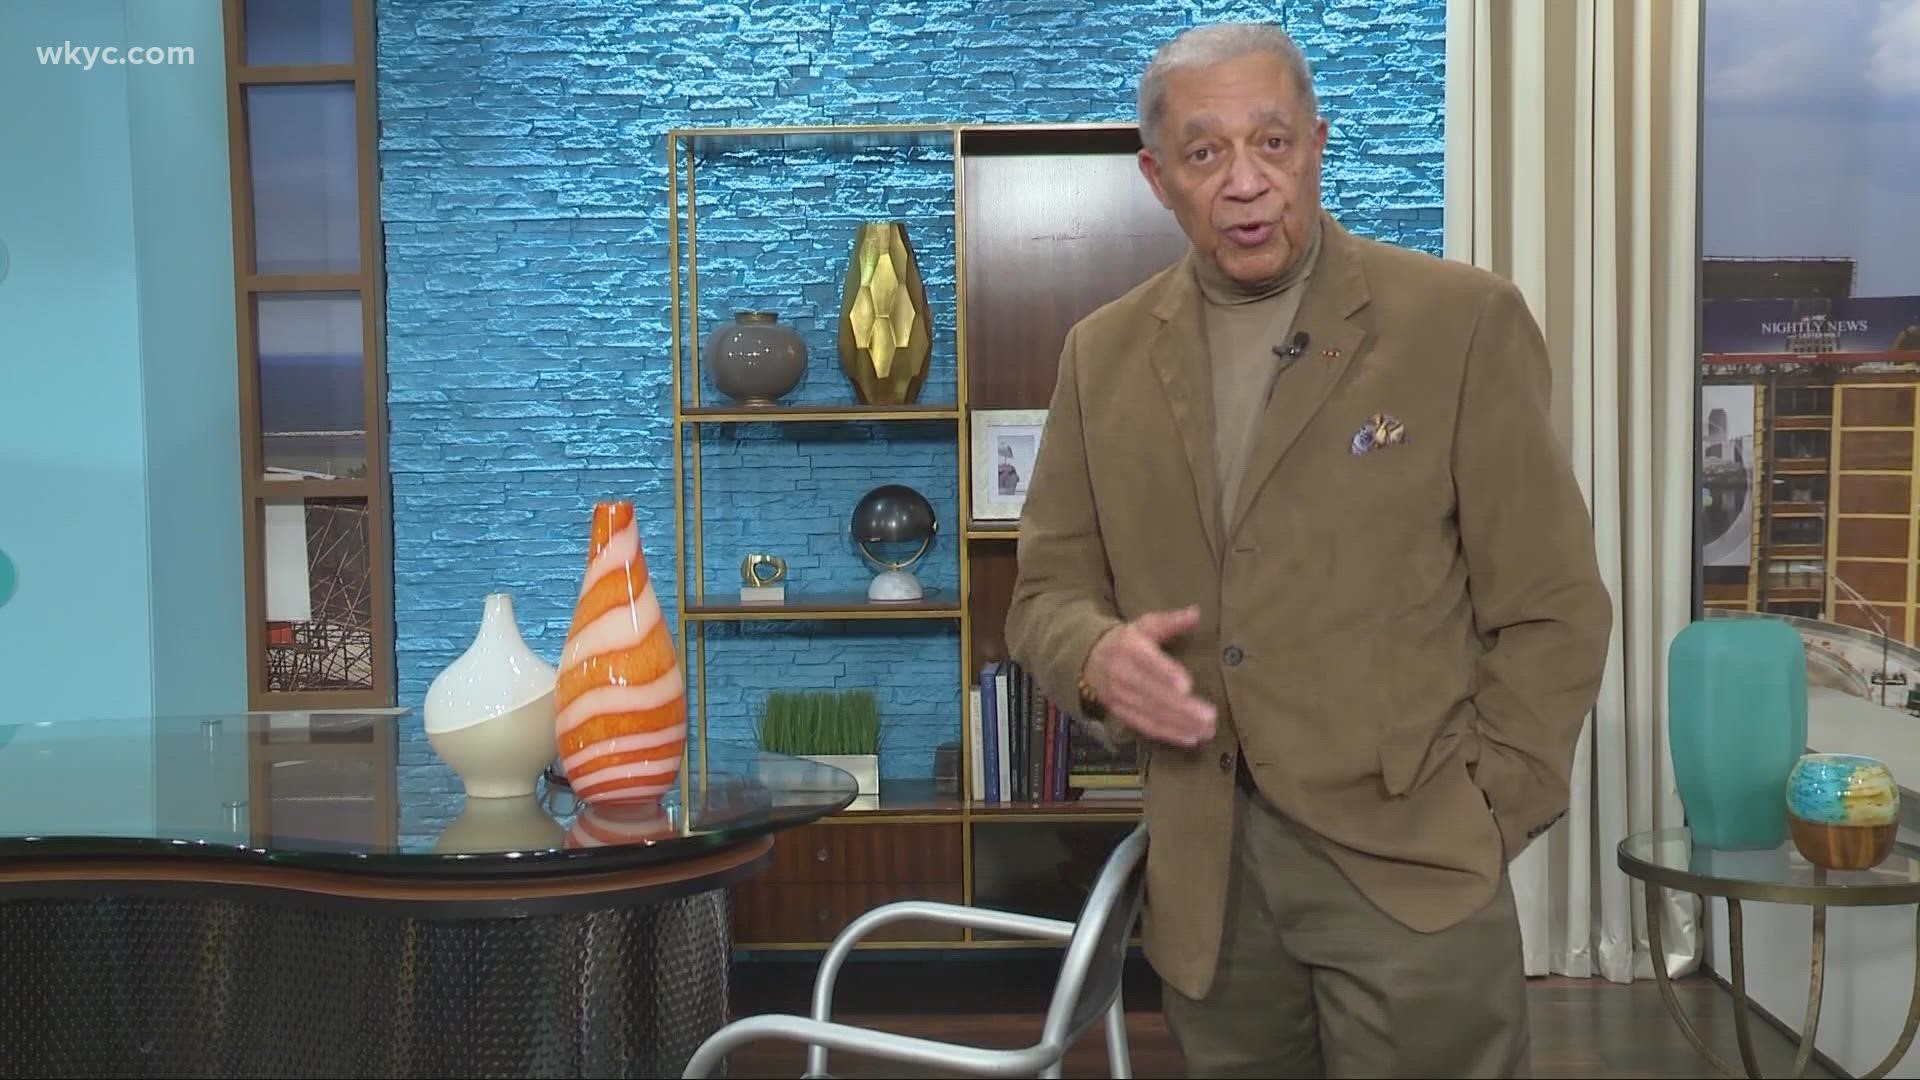 Leon Bibb shares how, for some, blessings and gratitude share space at the table with grief and hardship. All have their rightful place in many homes this year.